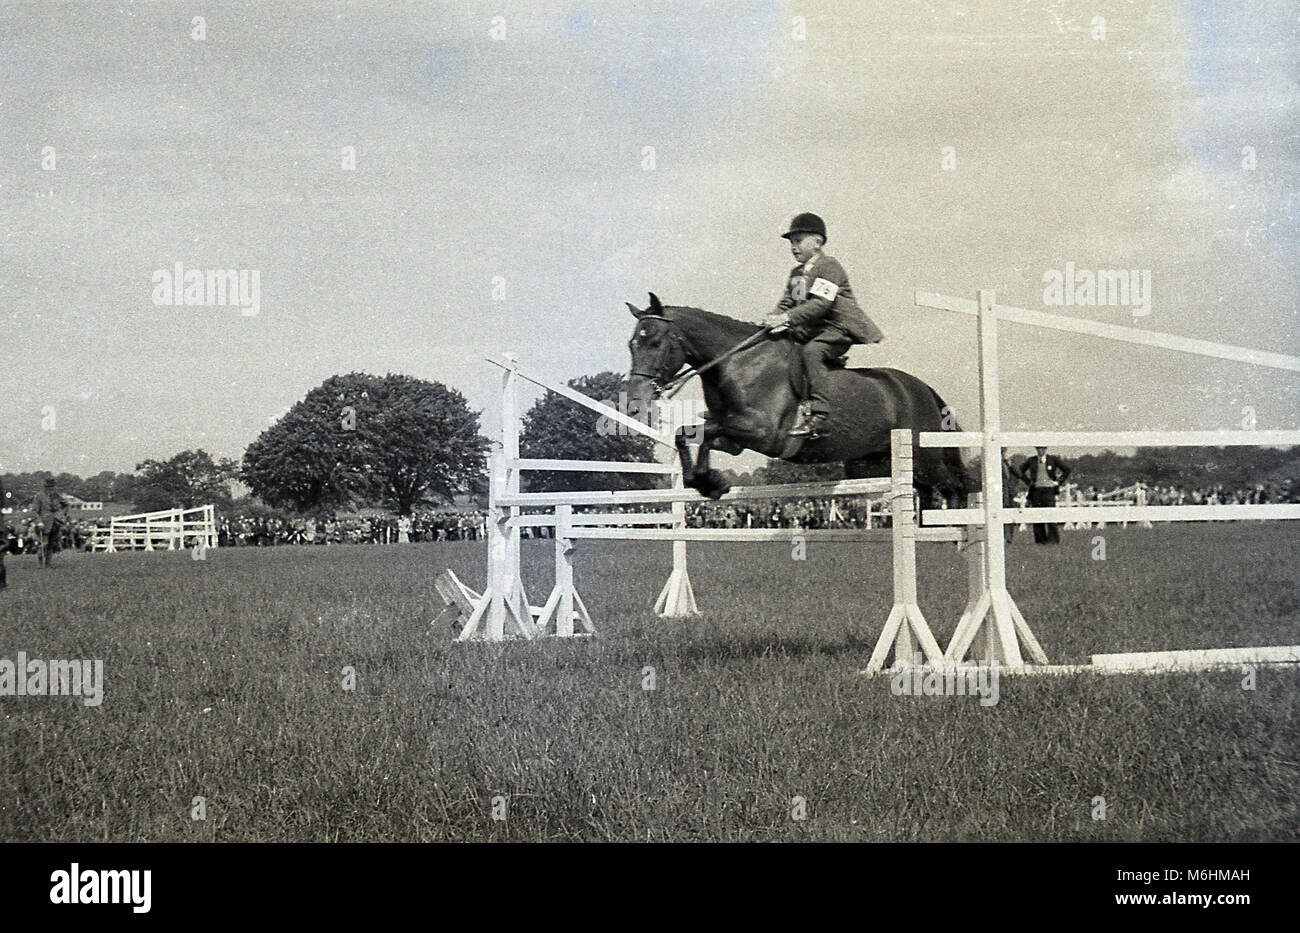 1940s, historical, a young boy riding a horse leaping over an obstacle or fence at an outdoor jumping event, England, UK. Stock Photo